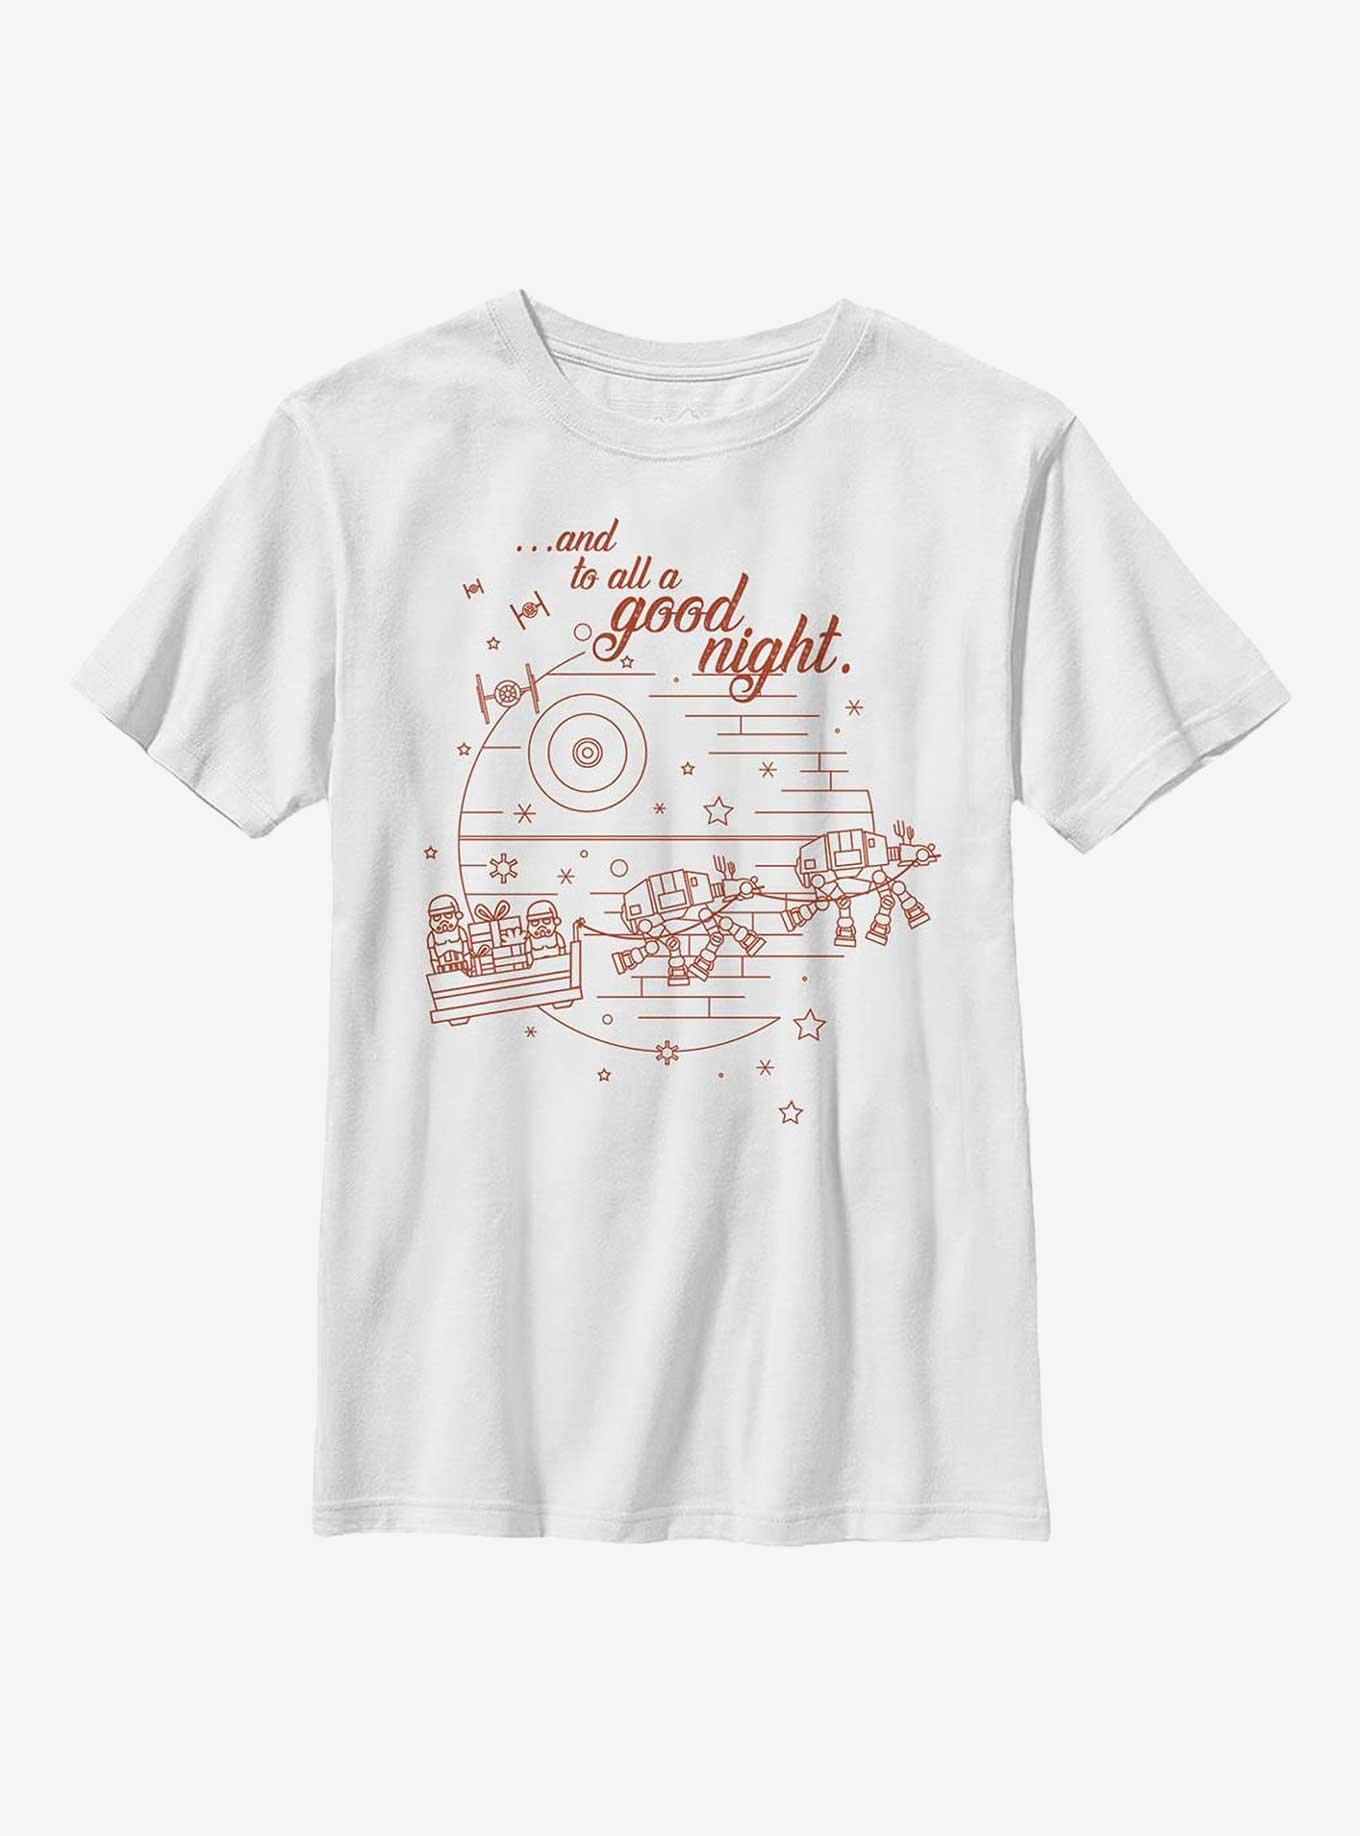 Star Wars To All A Good Night Youth T-Shirt, WHITE, hi-res